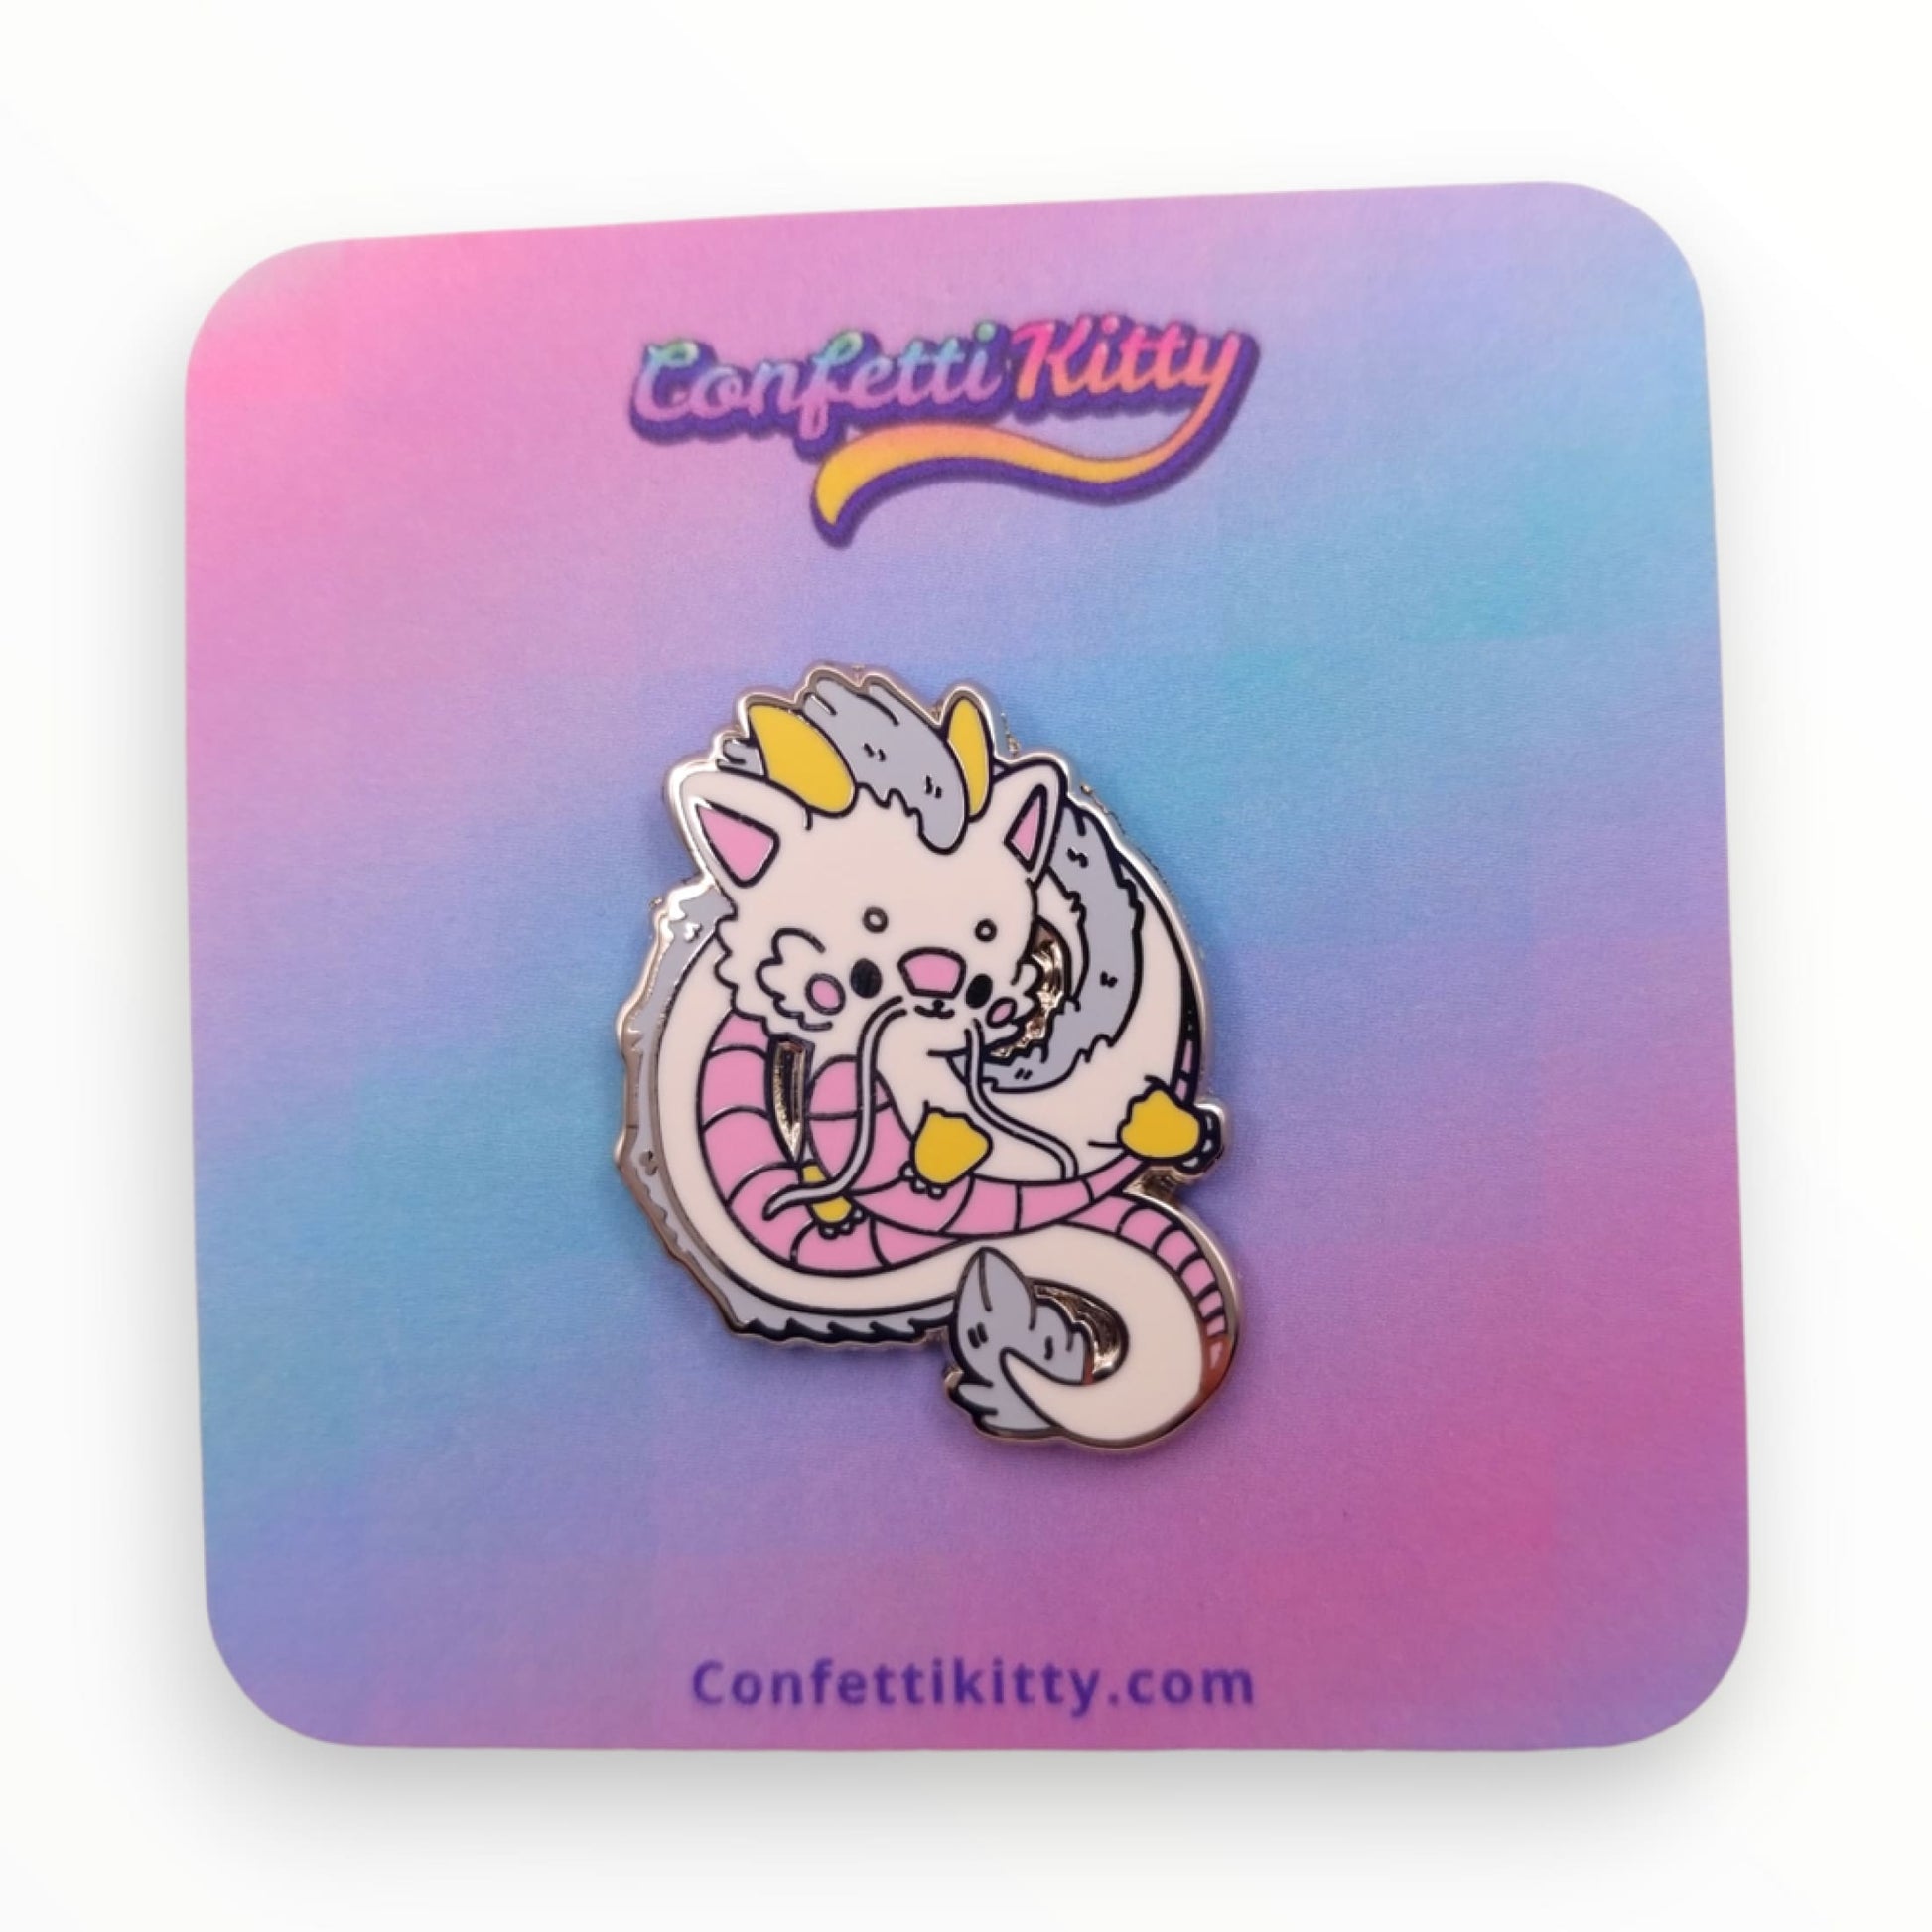 White Dragon Hard Enamel Pin from Confetti Kitty, Only 12.99